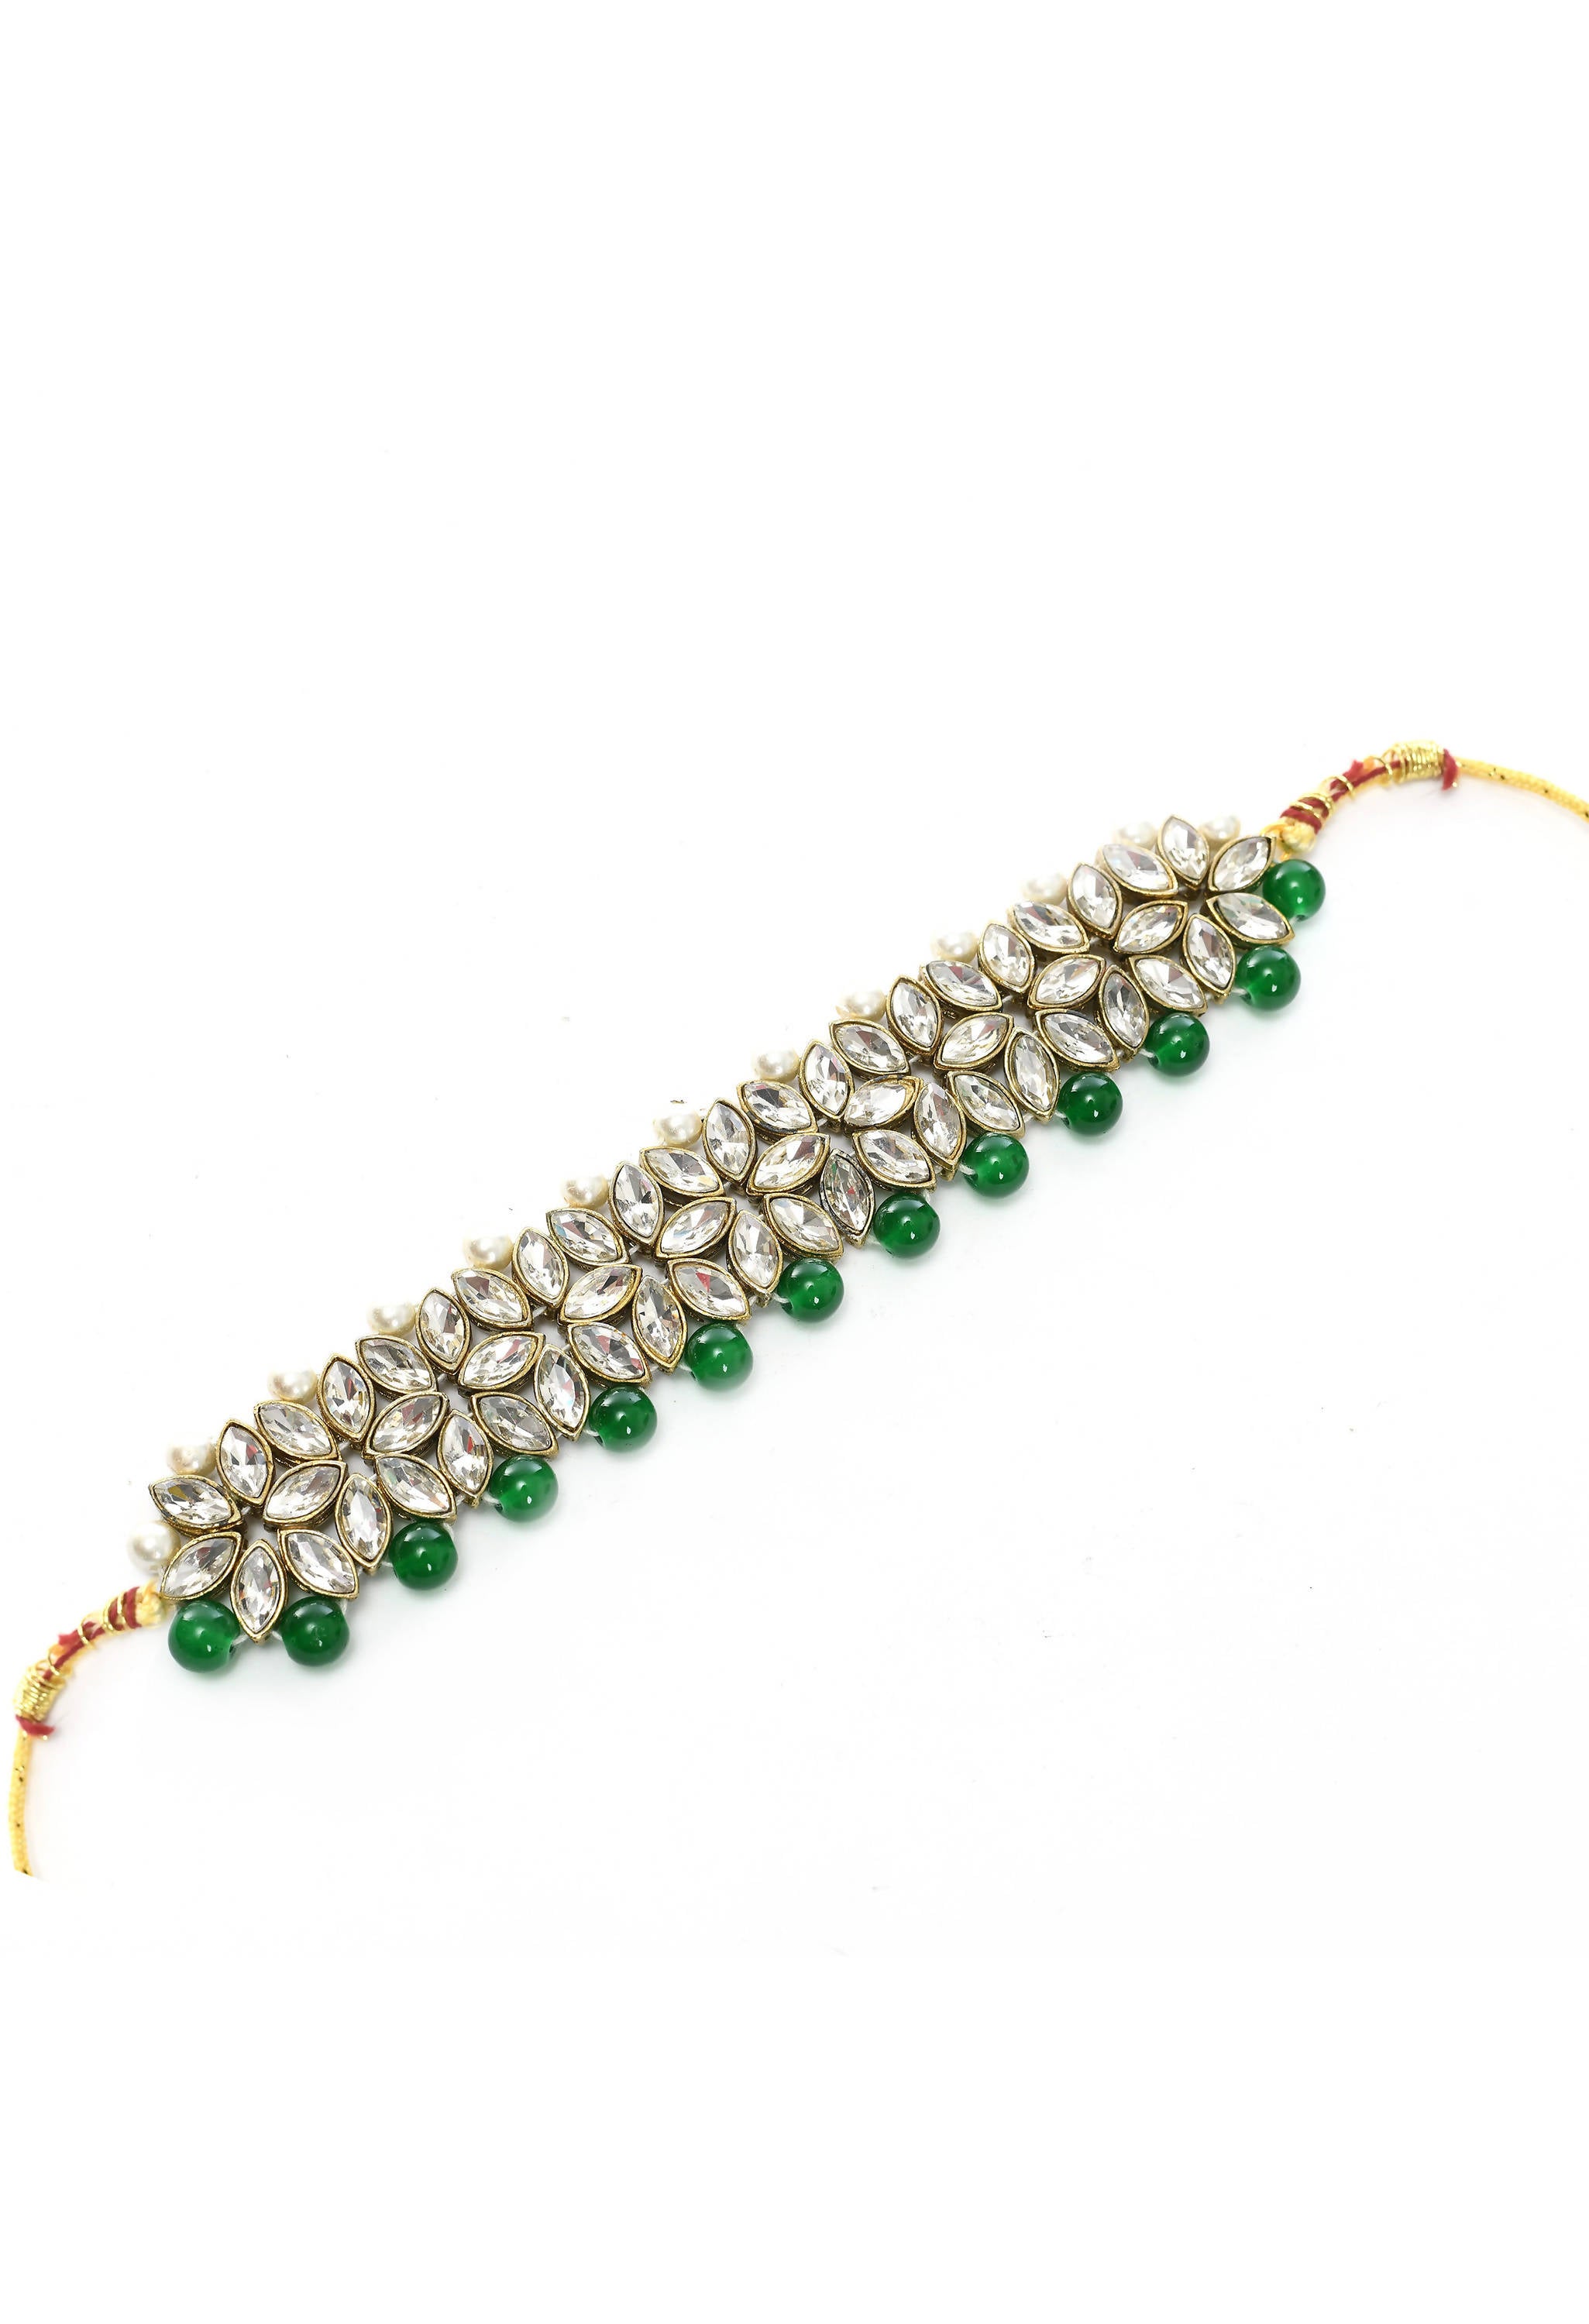 Johar Kamal Golden Plated with stone and green Pearls Necklace Combo Set Jkms_127